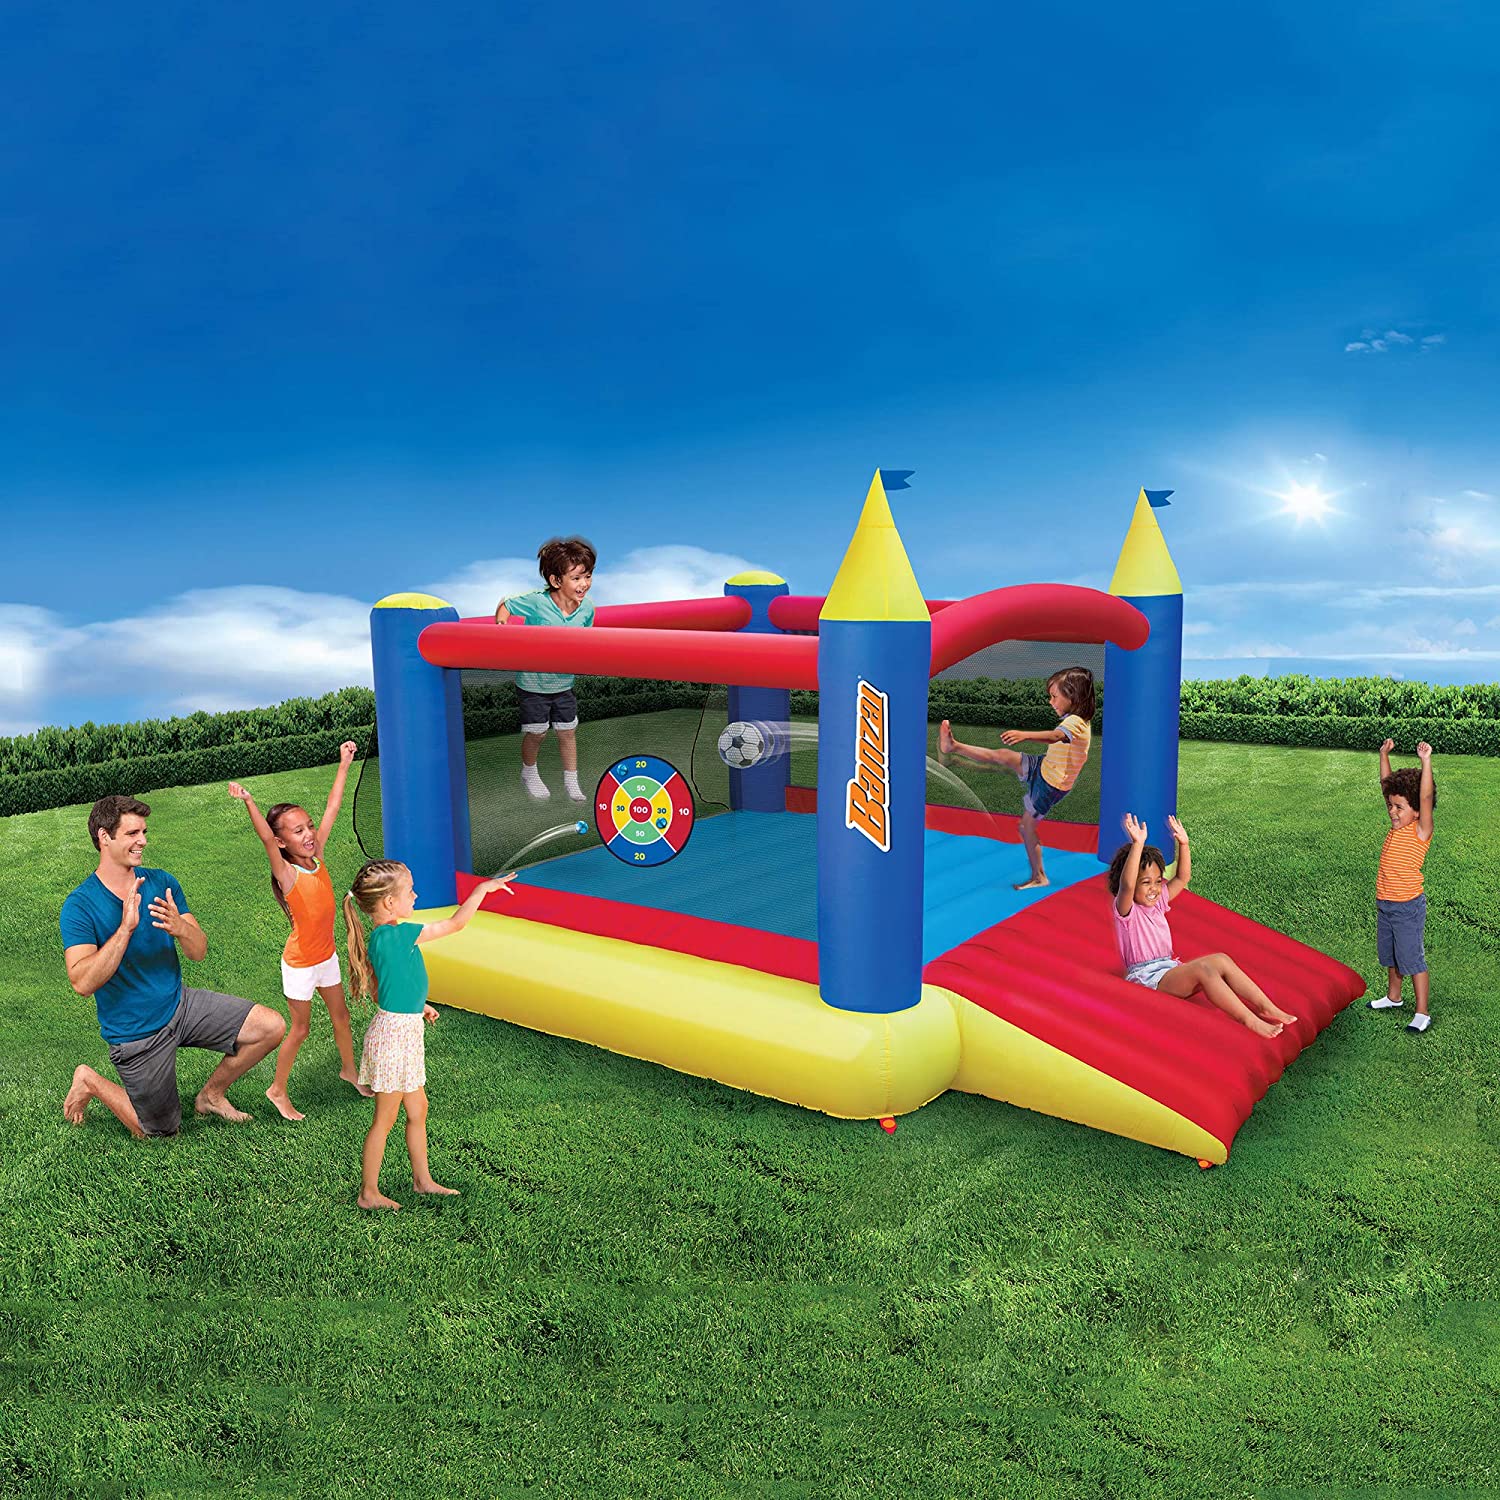 BANZAI Inflatable Water Slide & Bounce House (Combo Pack) - Huge Heavy Duty Outdoor Kids Adventure Park Pool with Sprinkler Wave and Slide Plus Large Bonus 12’x9 Bounce House - Free Blower Included - image 3 of 5